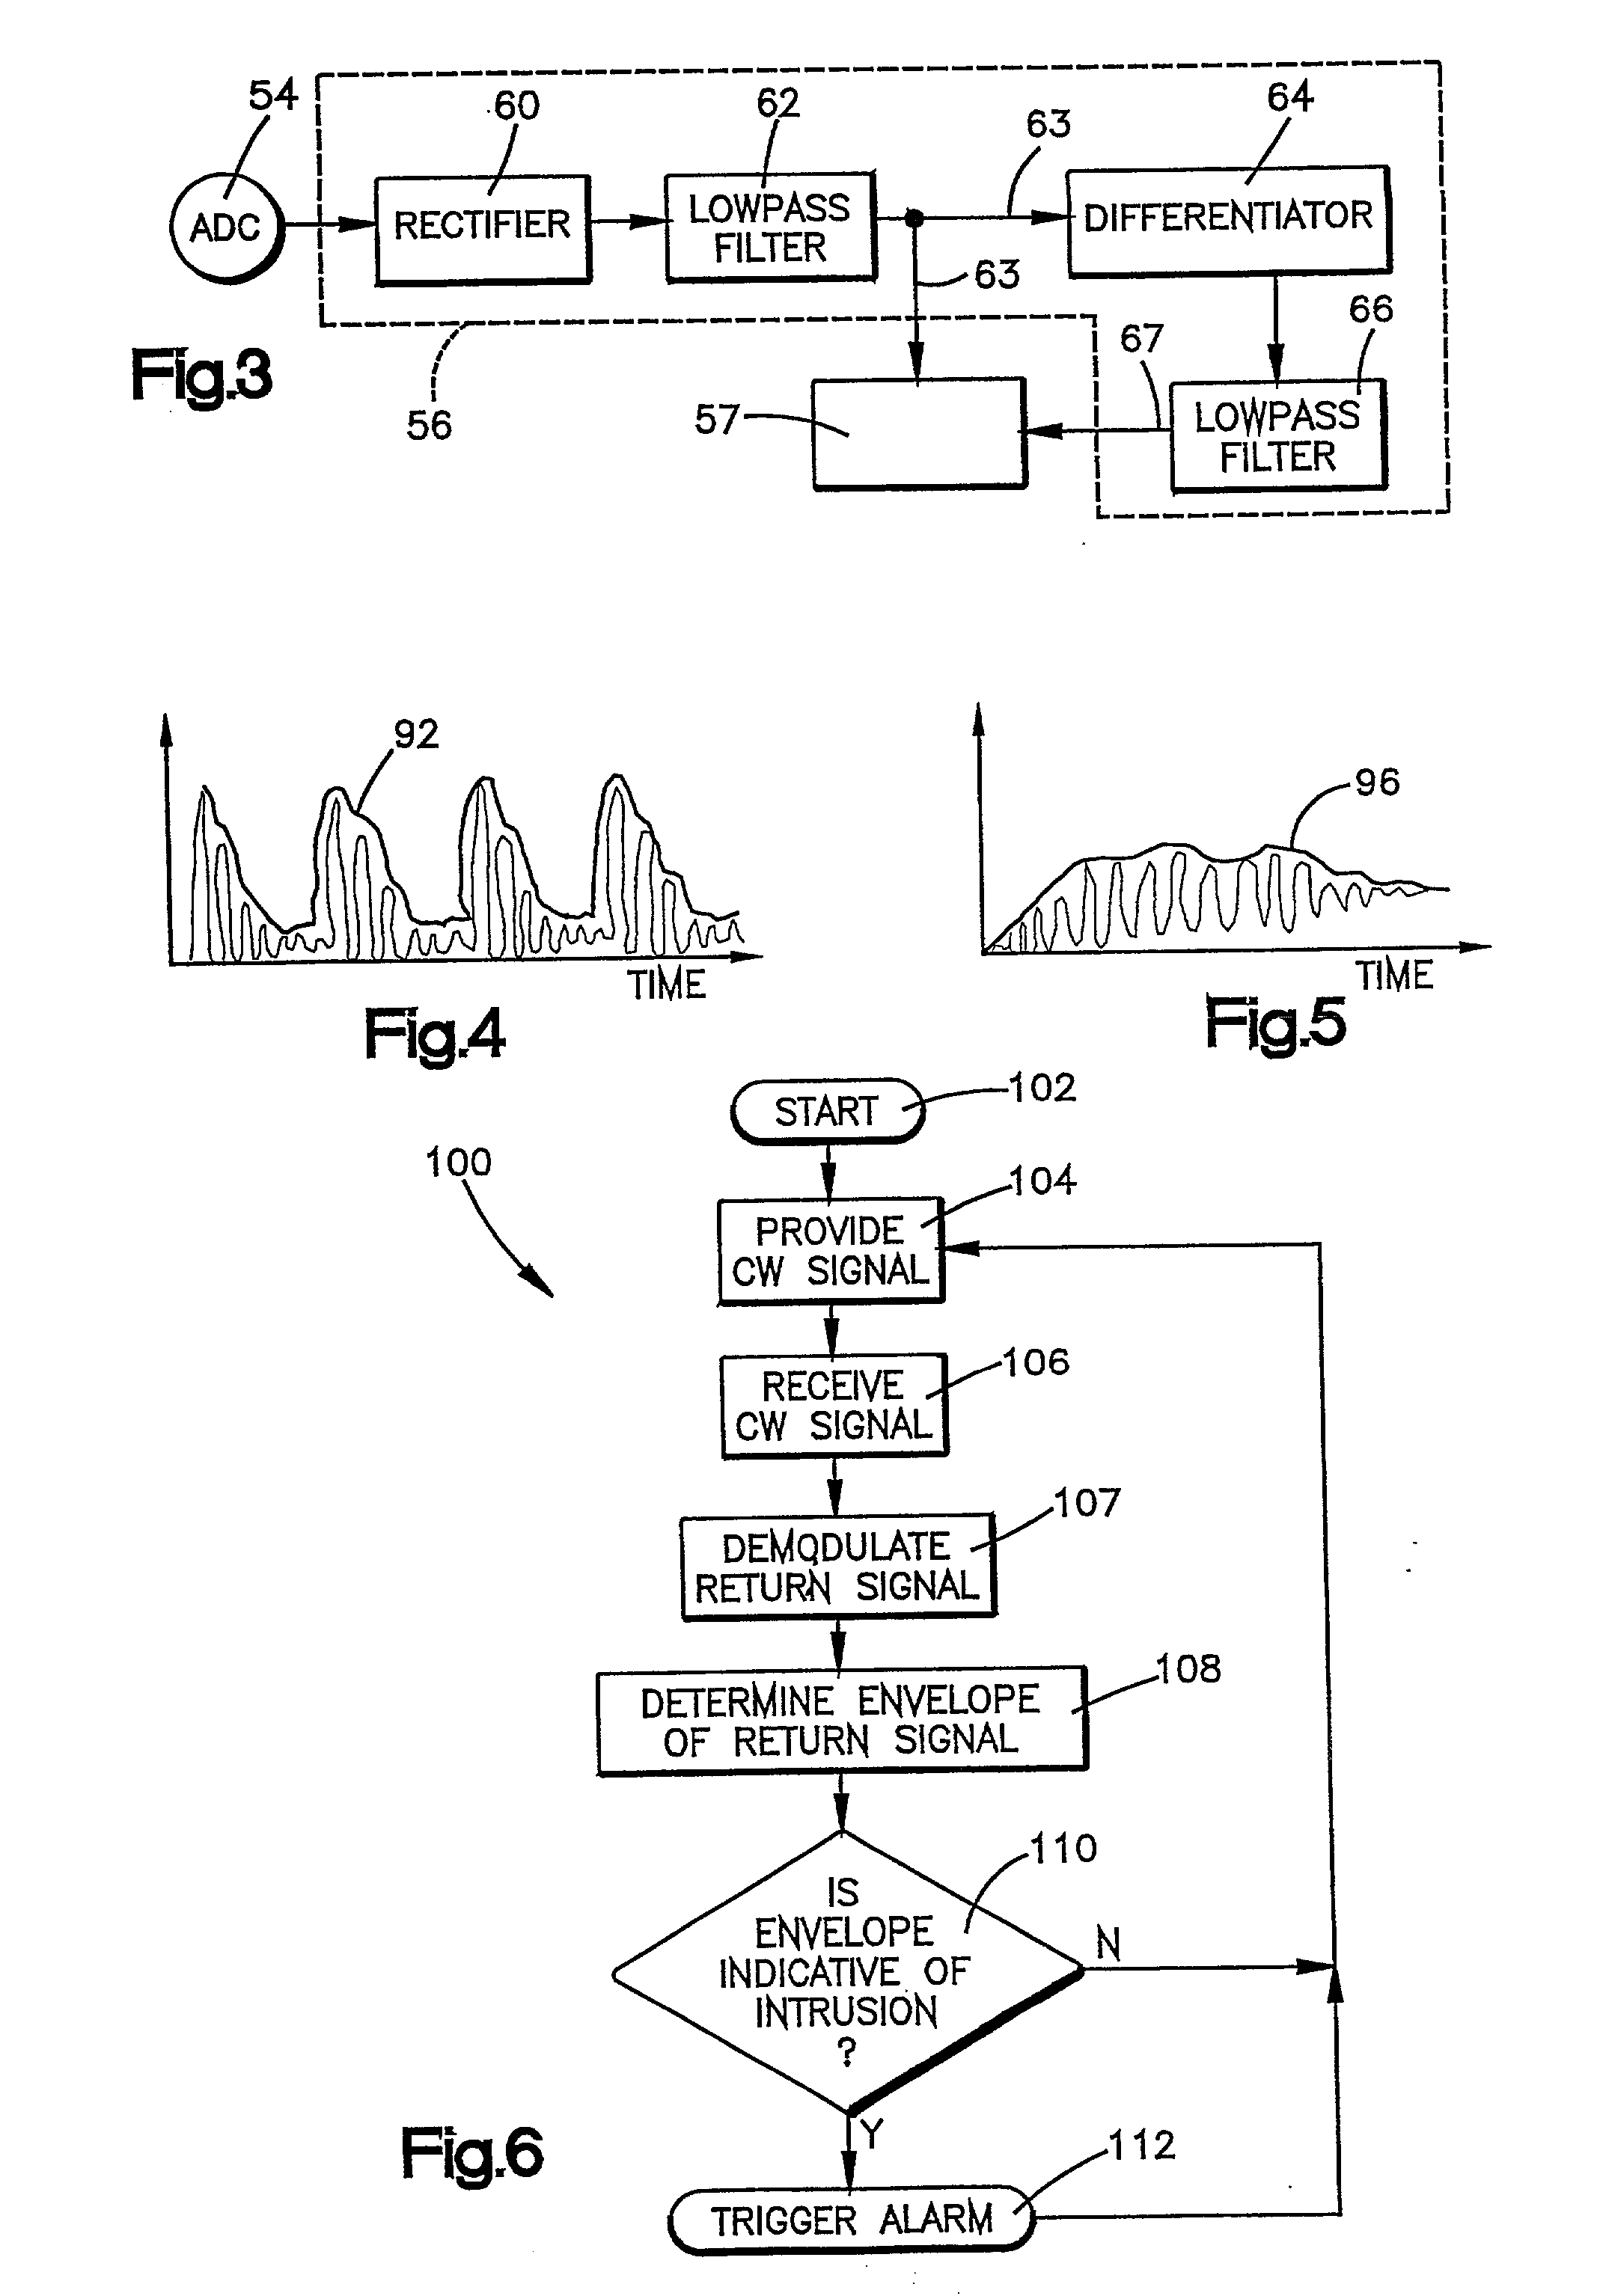 Method and apparatus for detecting intrusion and non-intrusion events